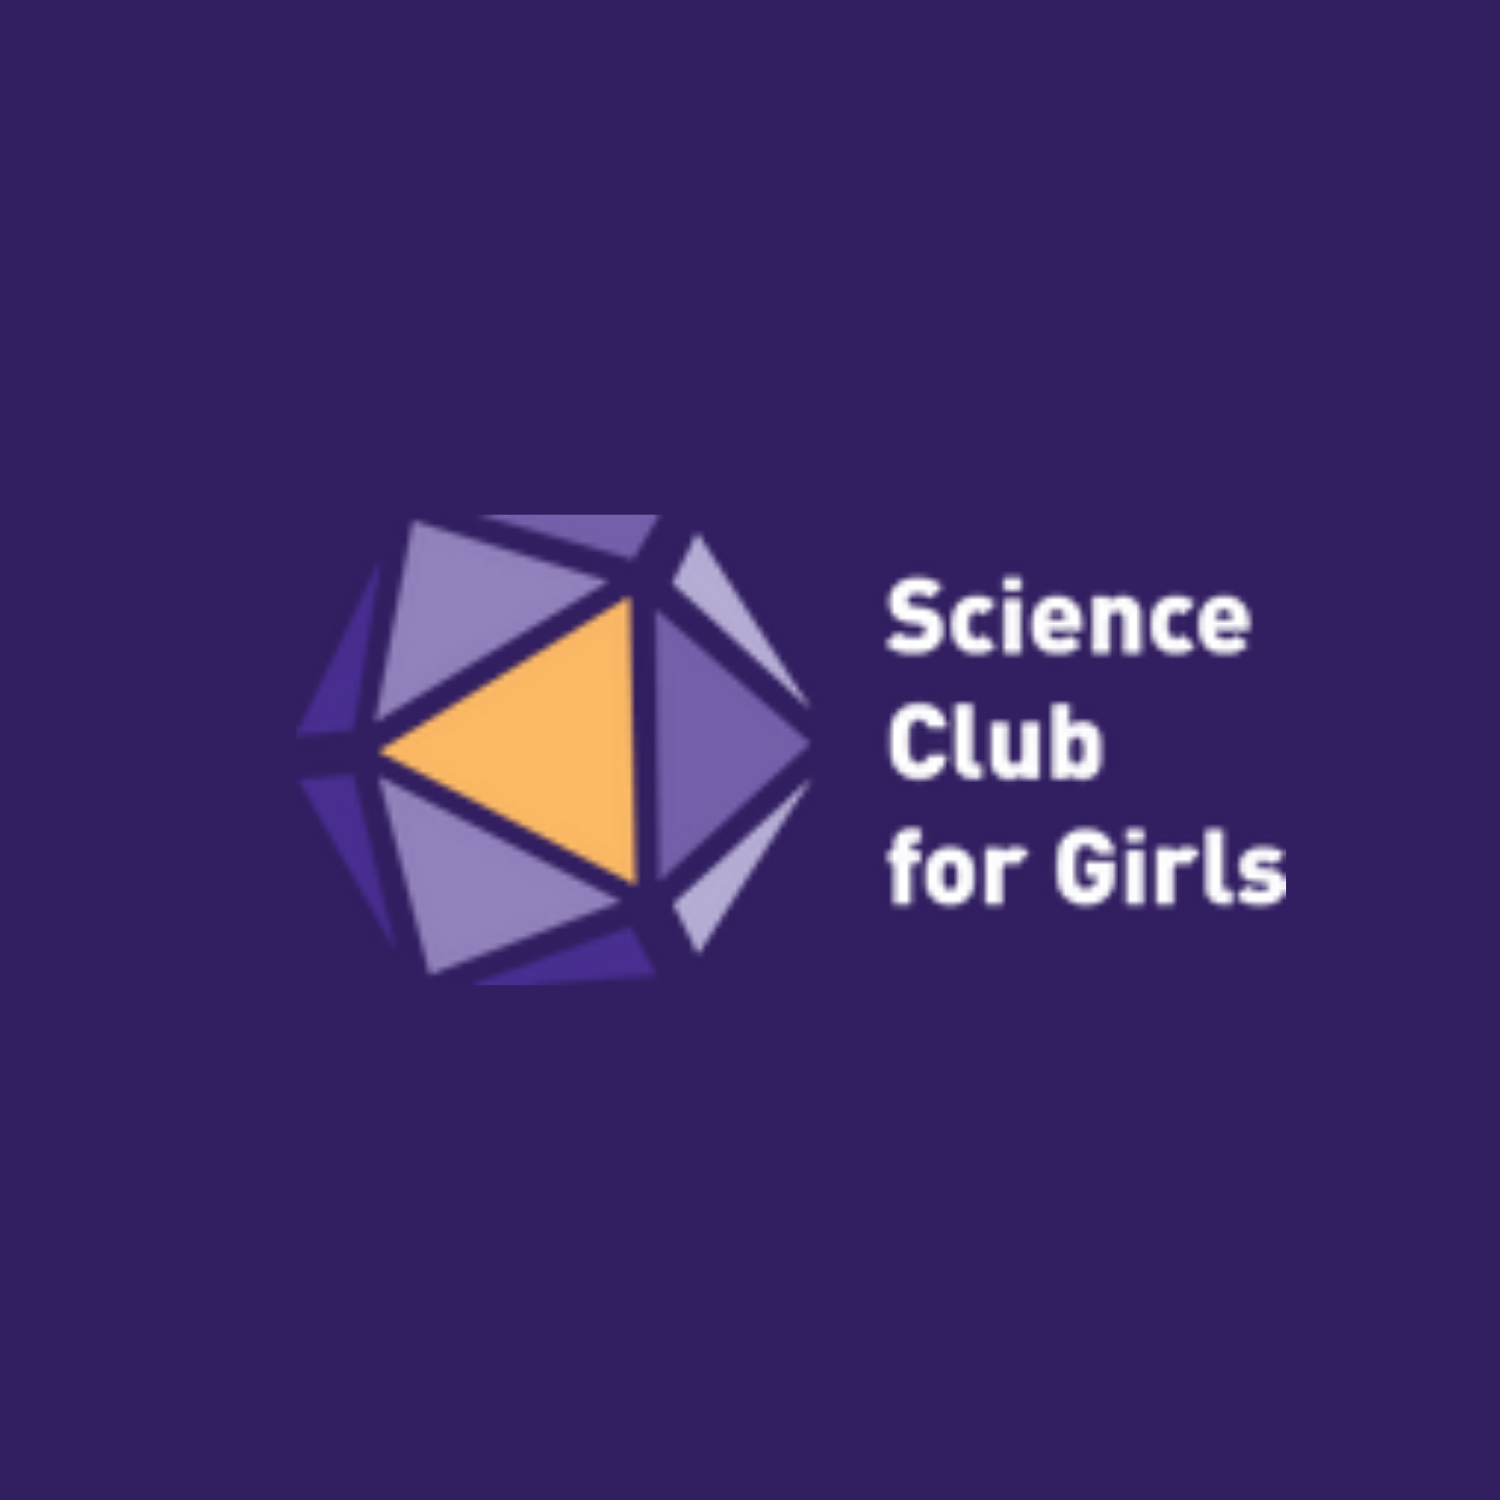 Science Club for Girls